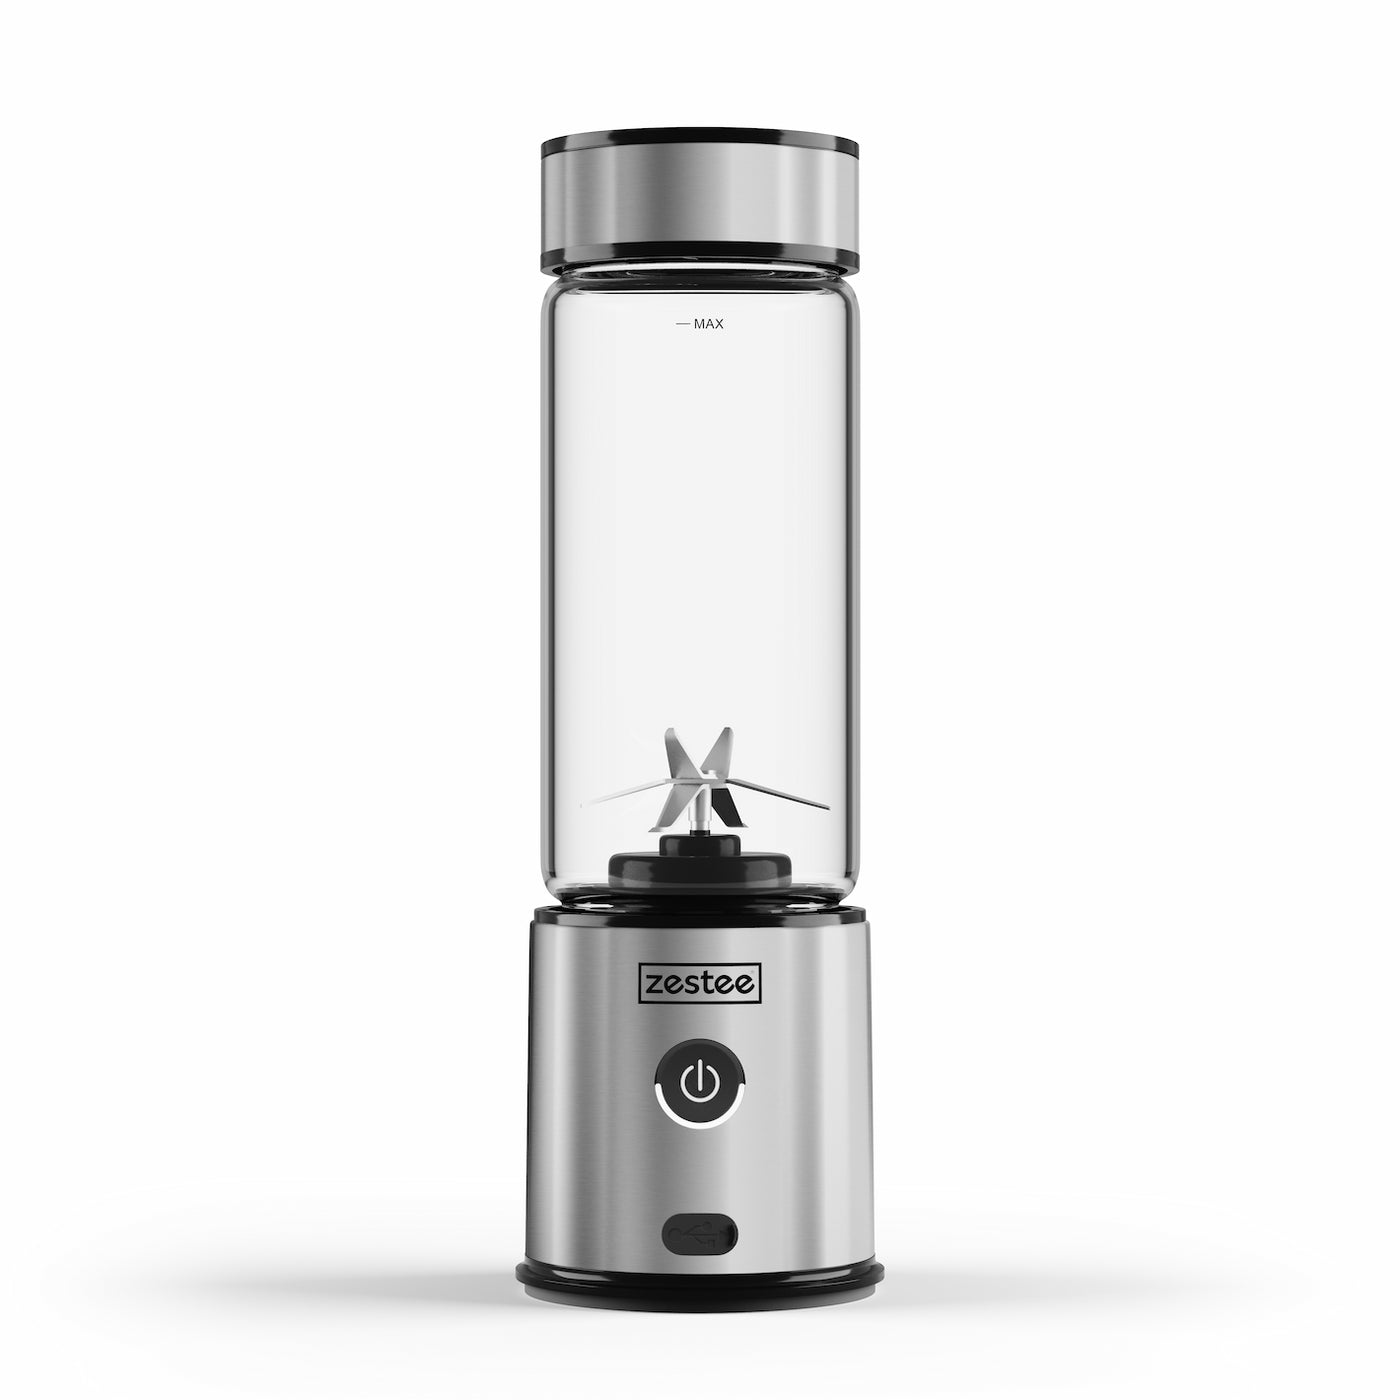 Zestee portable blender, stainless steel, USB rechargeable, 450ml glass cup